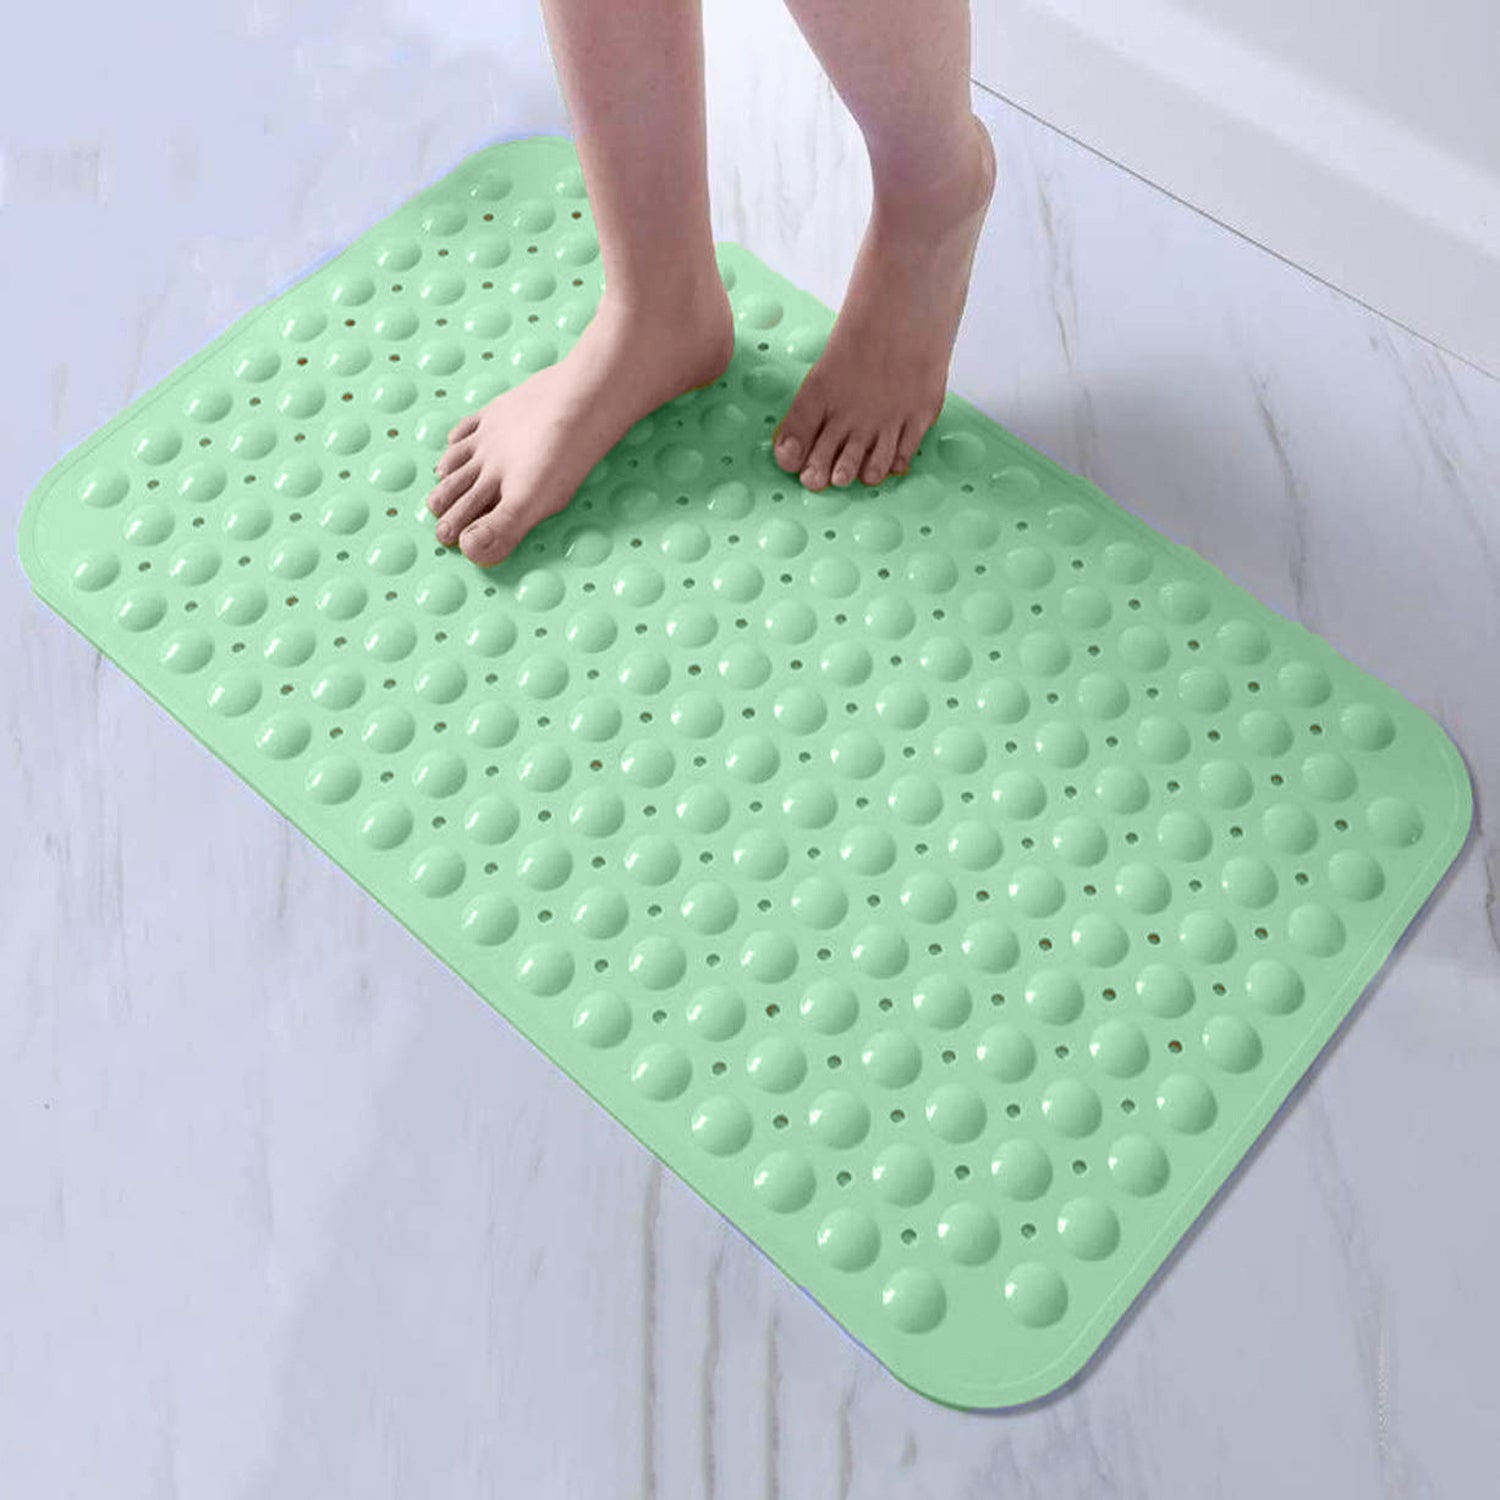 LifeKrafts Experia Anti-Slip with Suction Cup Bath Mat, 88x58cm (Green Color with Soft-Pebble) LifeKrafts